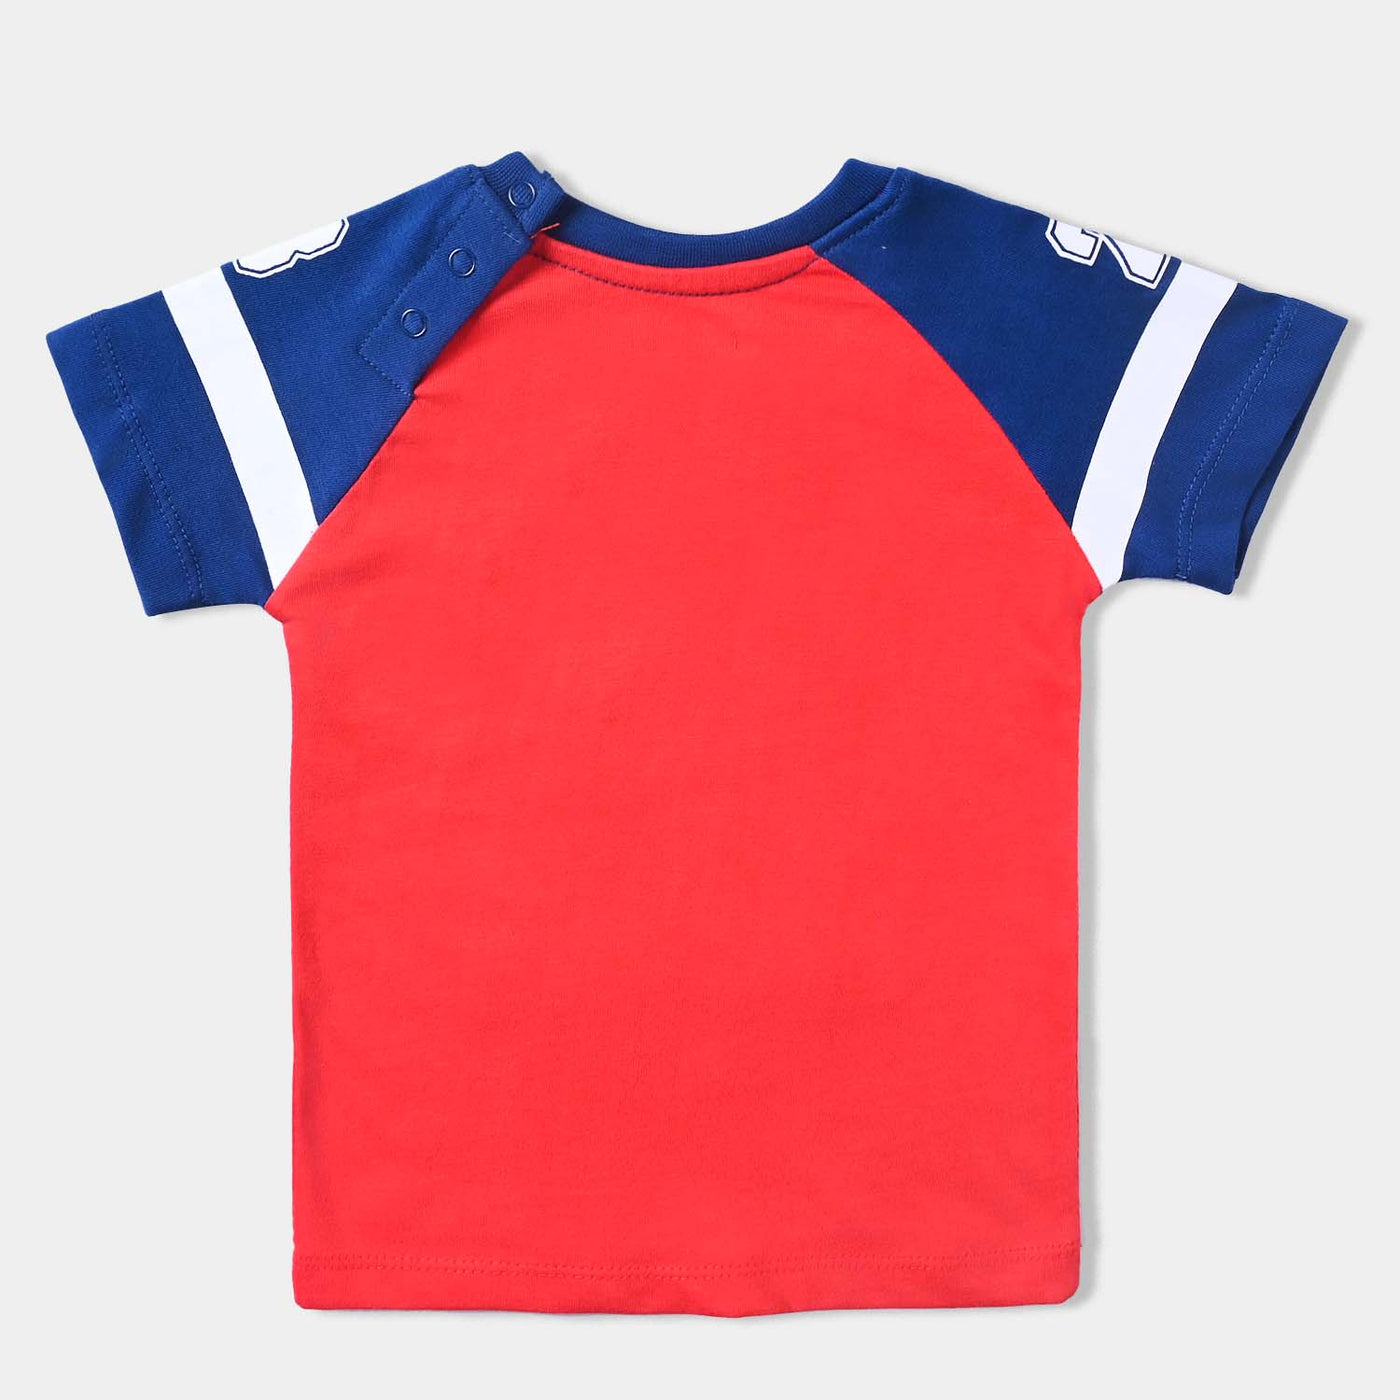 Infant Boys Cotton Jersey T-Shirt-HR.Red